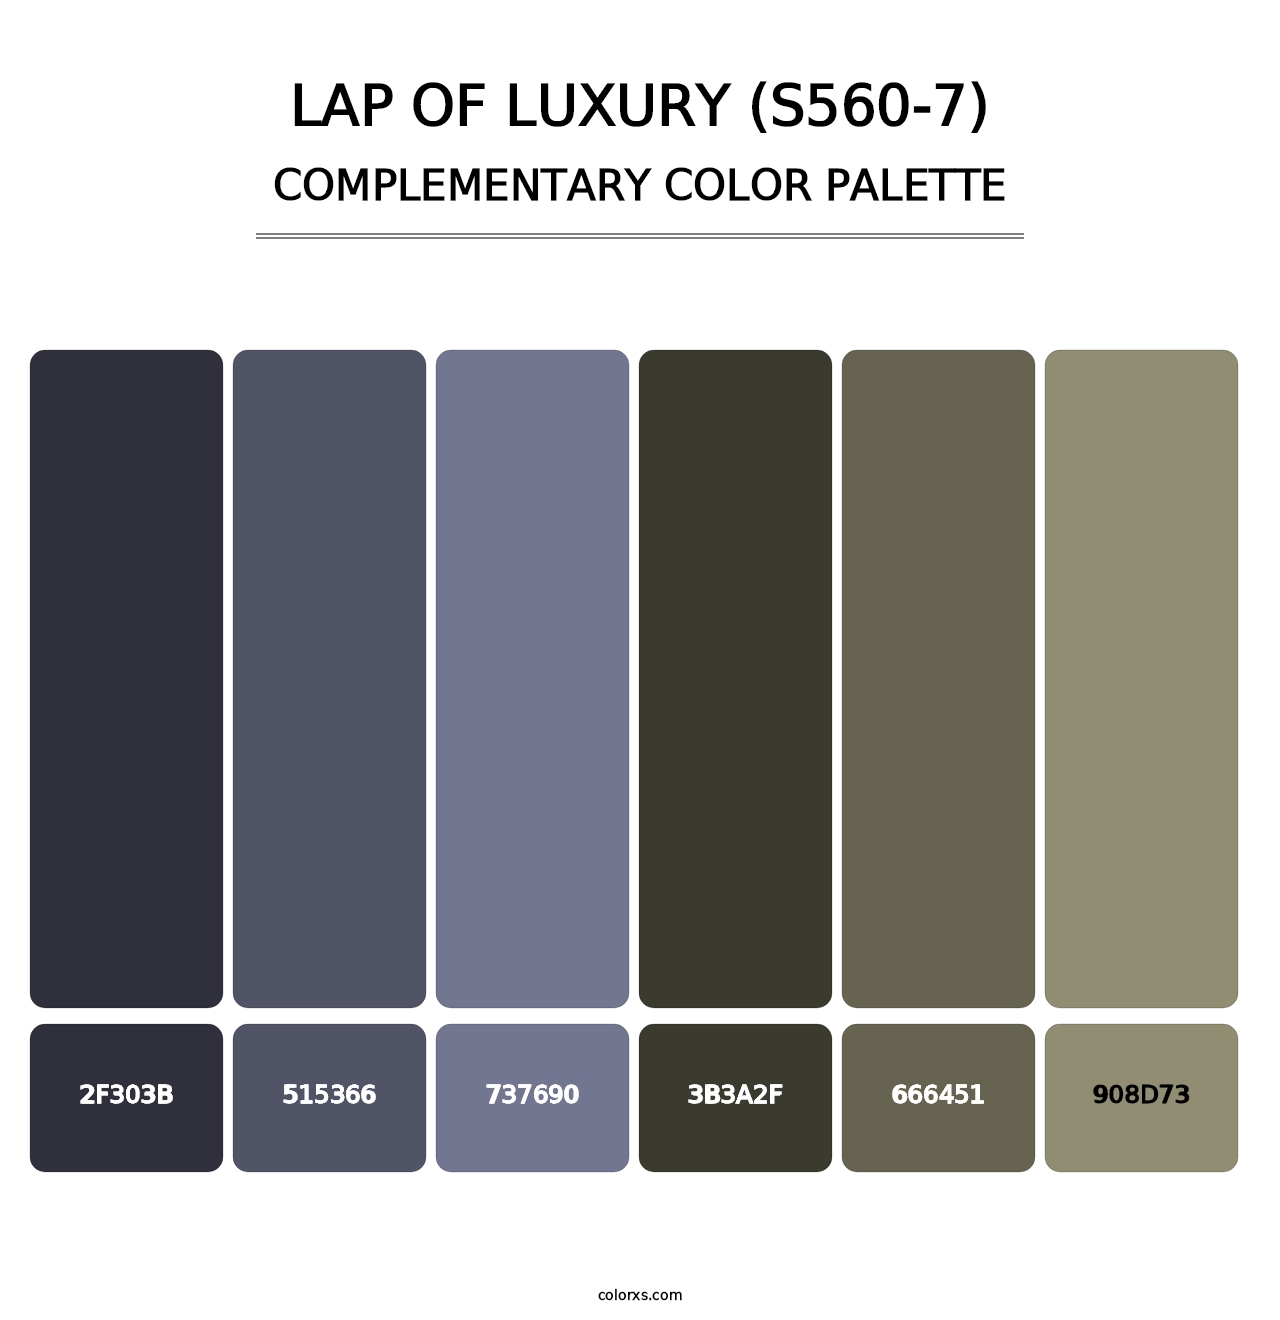 Lap Of Luxury (S560-7) - Complementary Color Palette